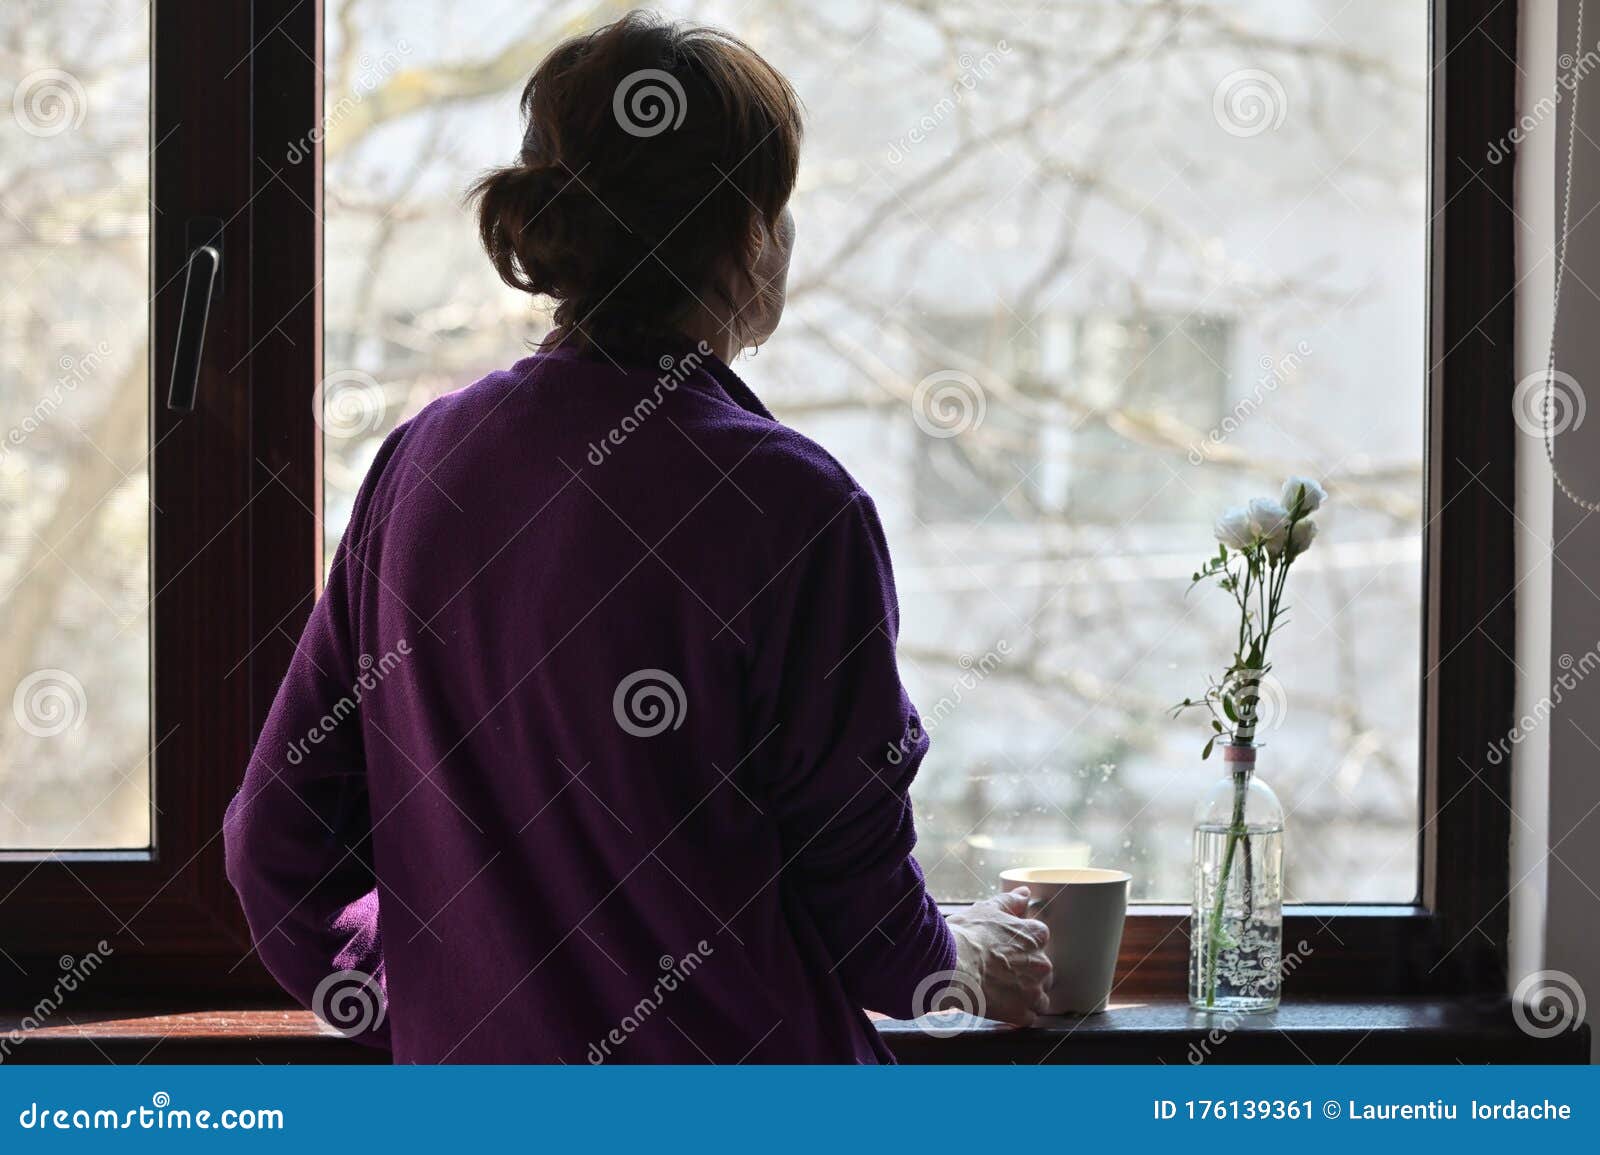 a self-isolate woman or quarantine looking out